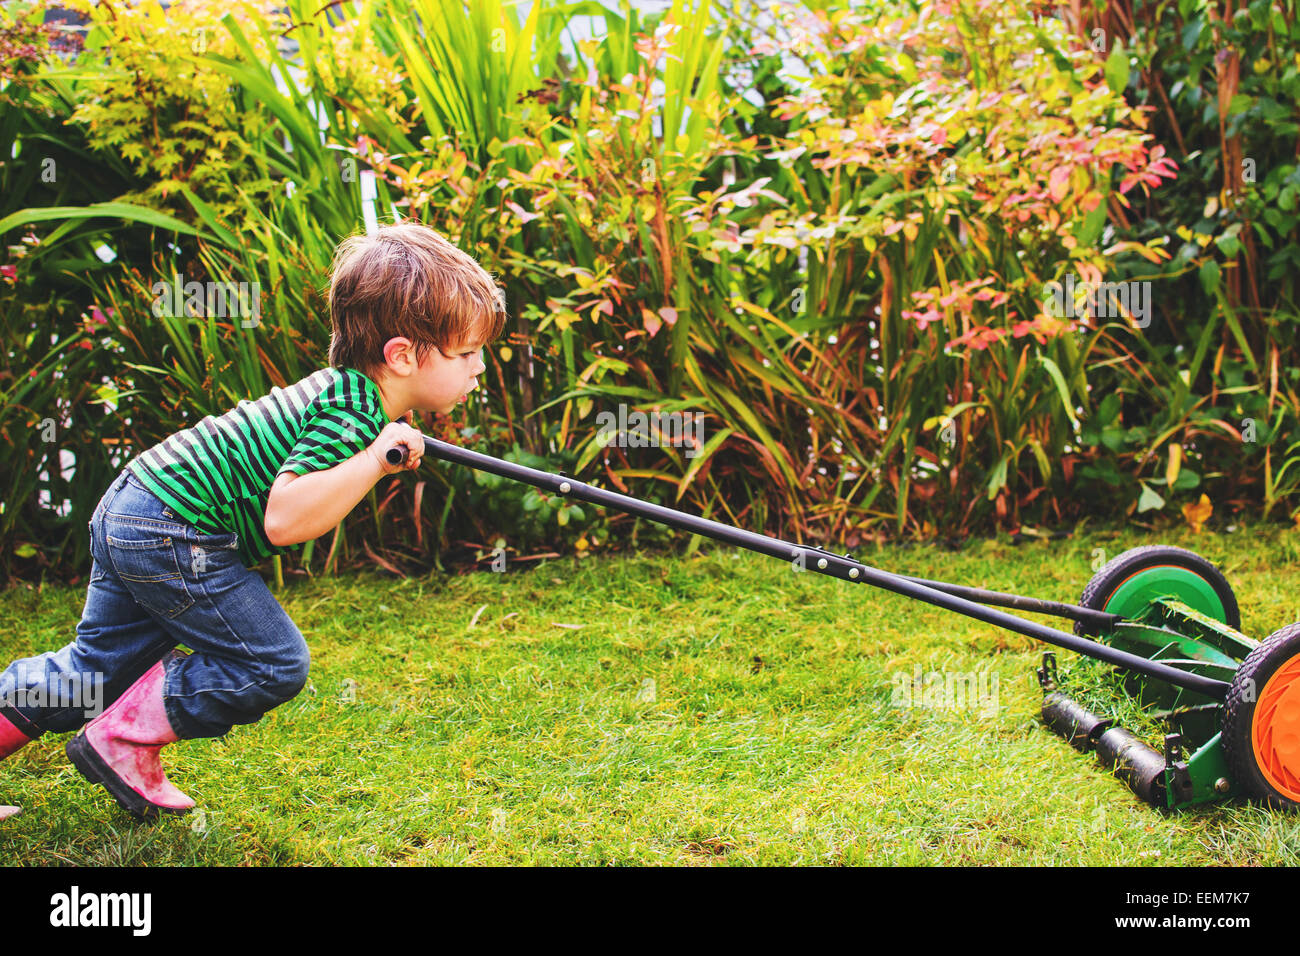 Boy mowing the lawn Stock Photo